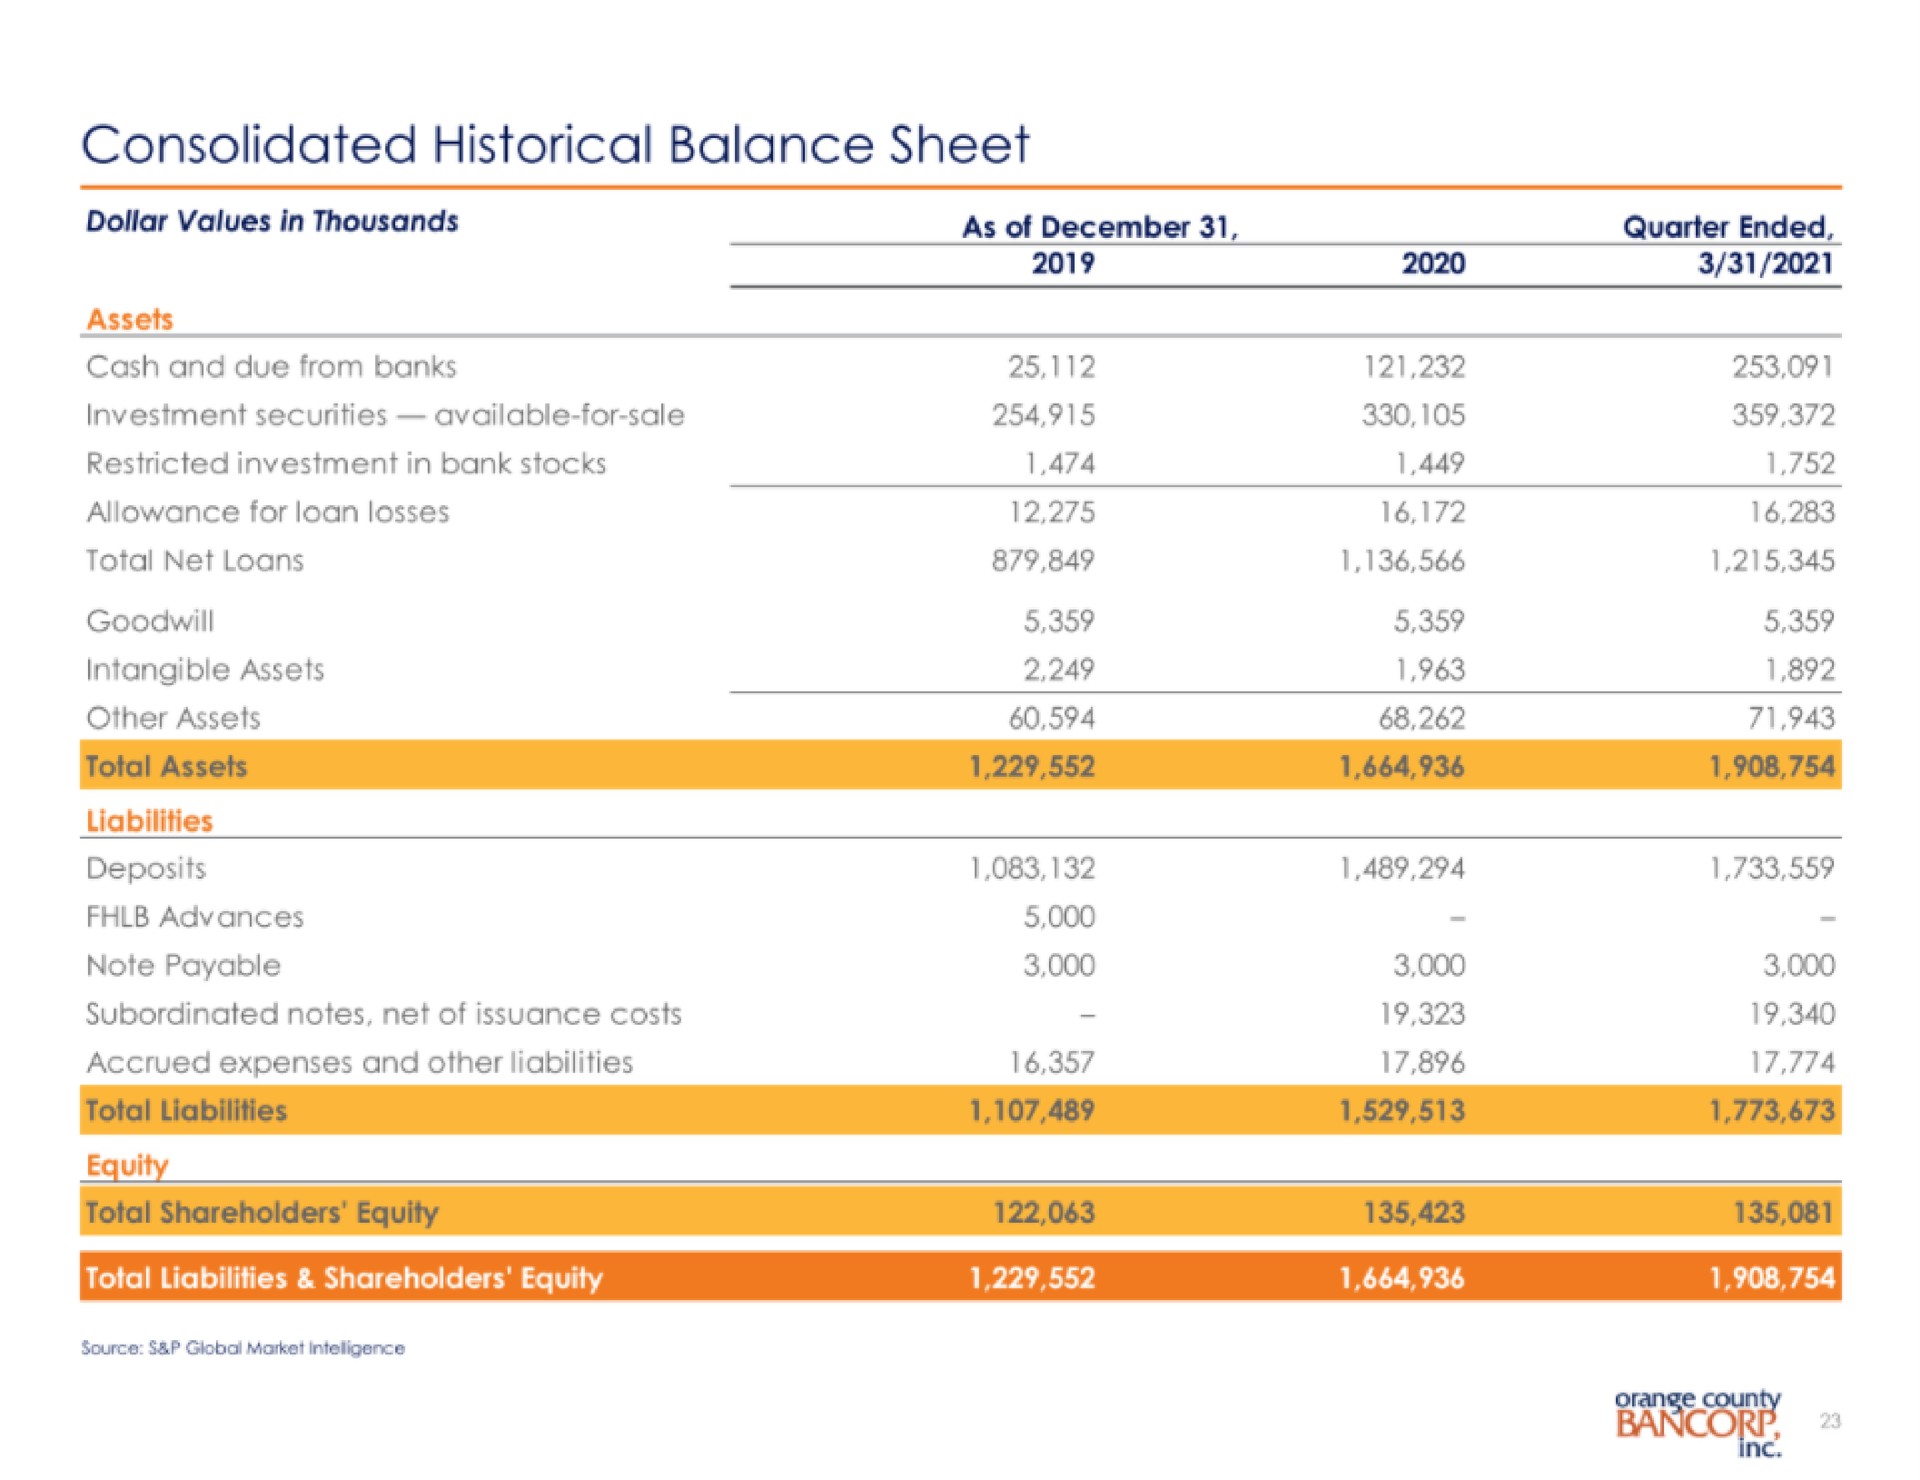 consolidated historical balance sheet total assets total | Orange County Bancorp